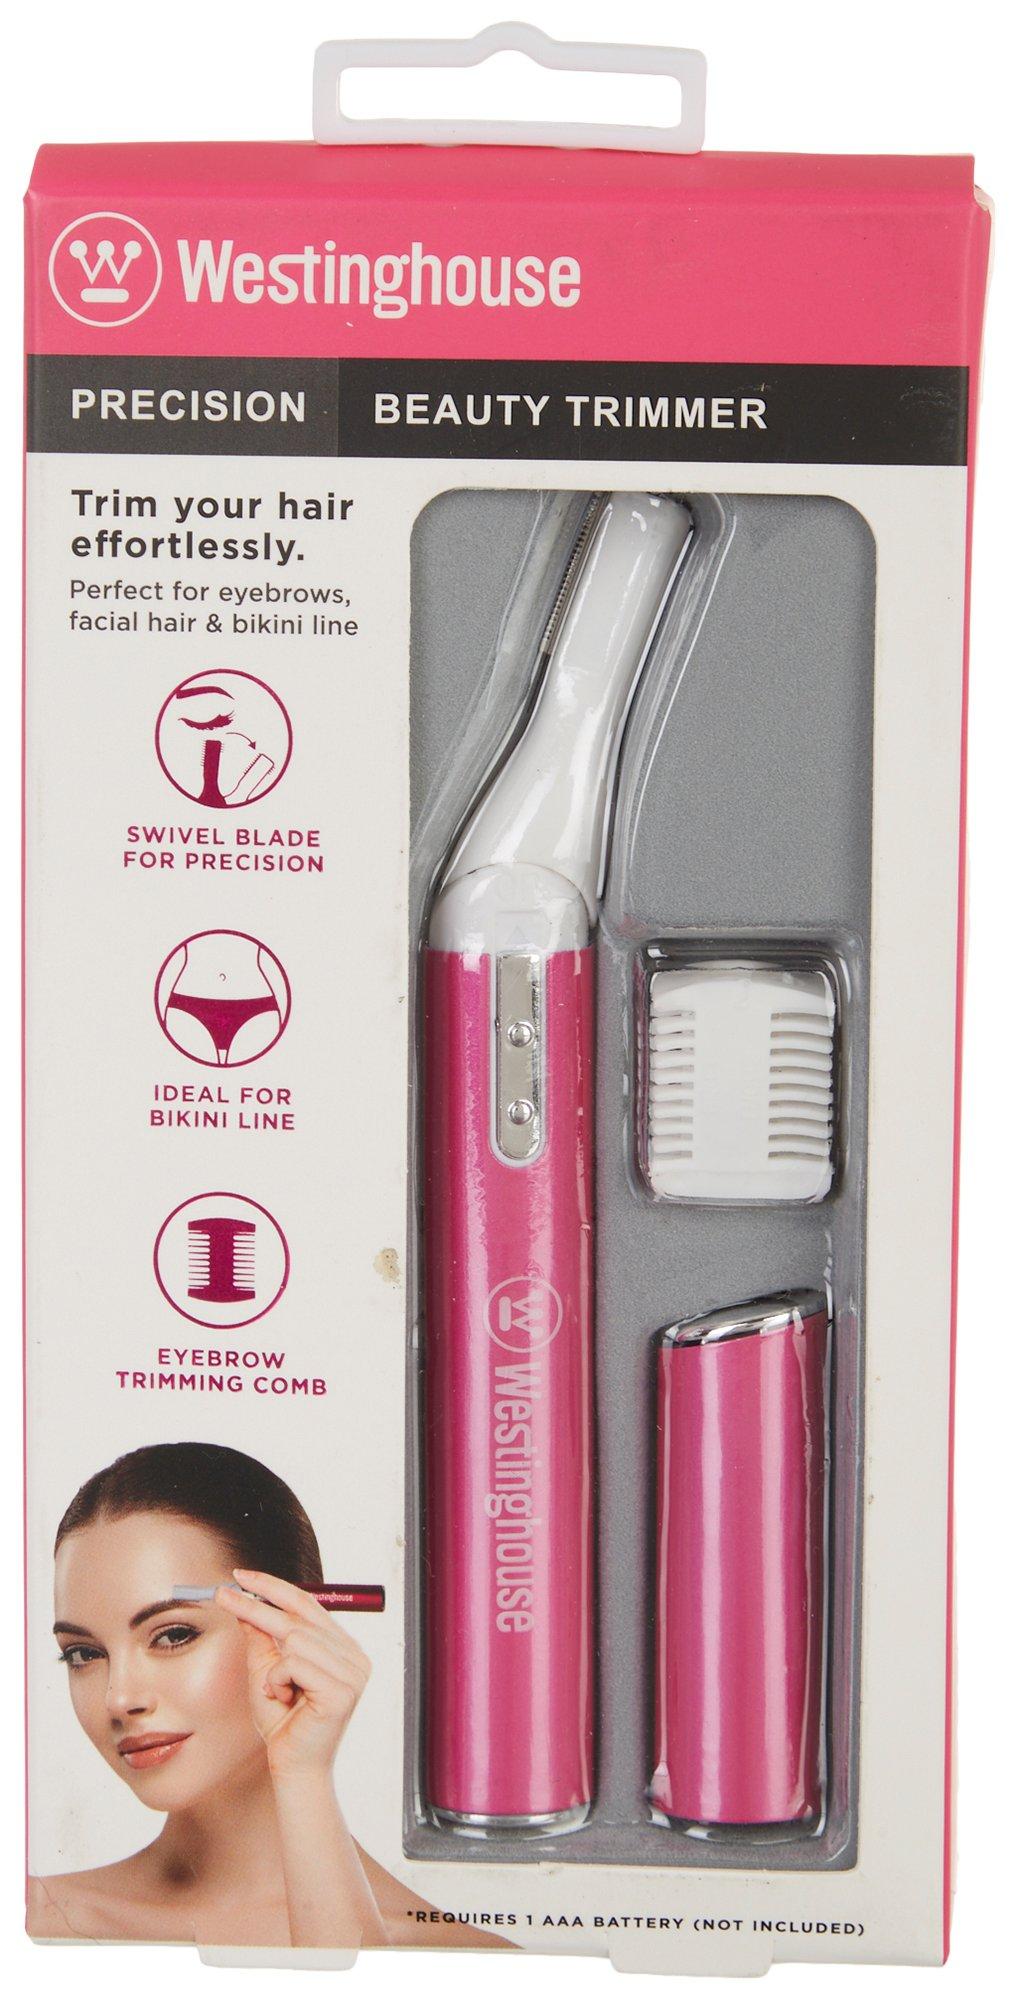 Westinghouse Precision Beauty Trimmer